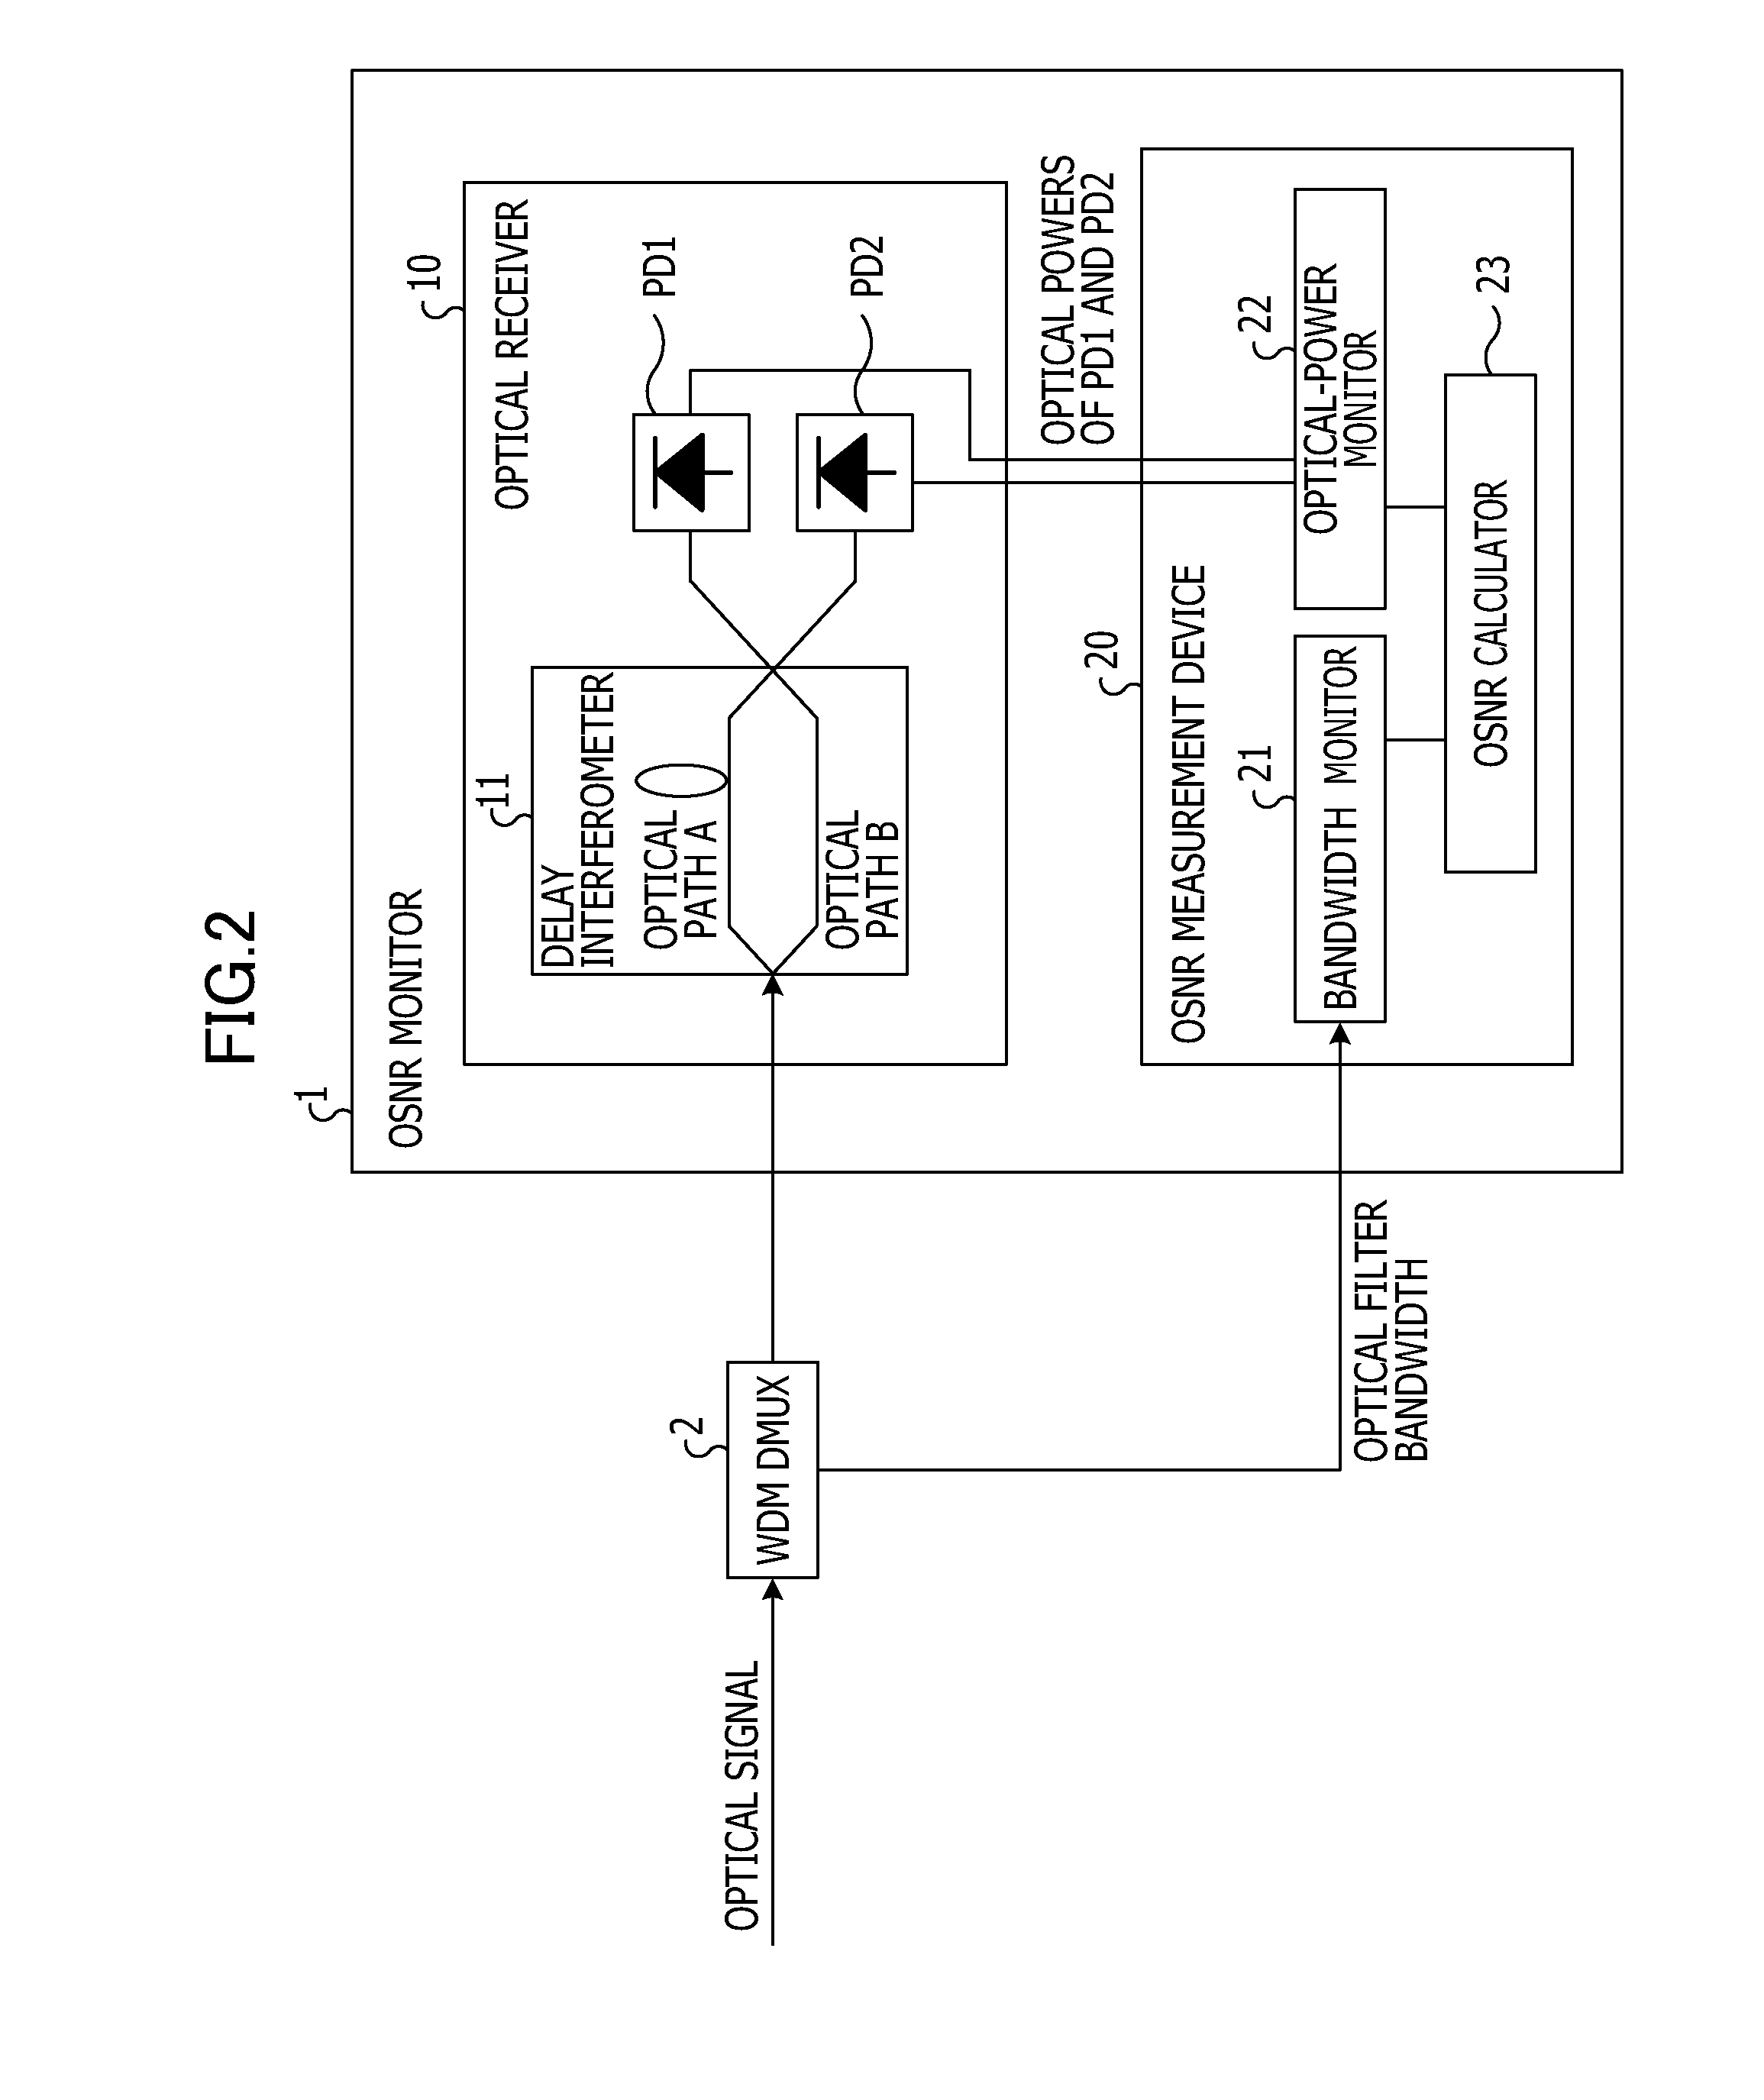 Osnr monitor device and osnr measurement device